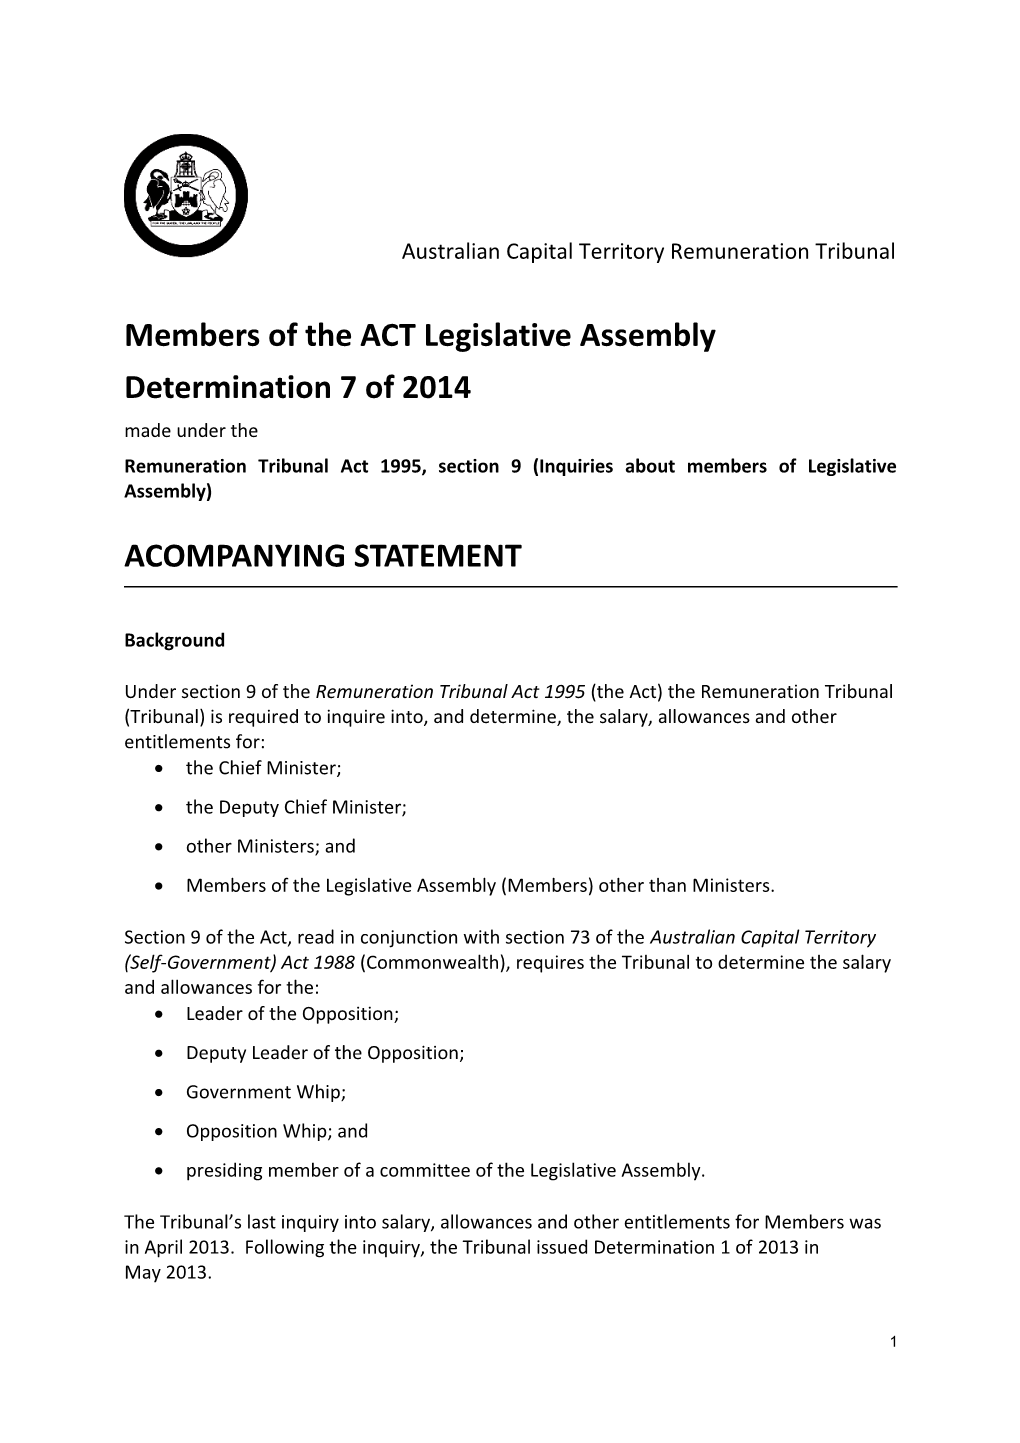 Dtermination 7 of 2014 - Members of the ACT Legislative Assembly